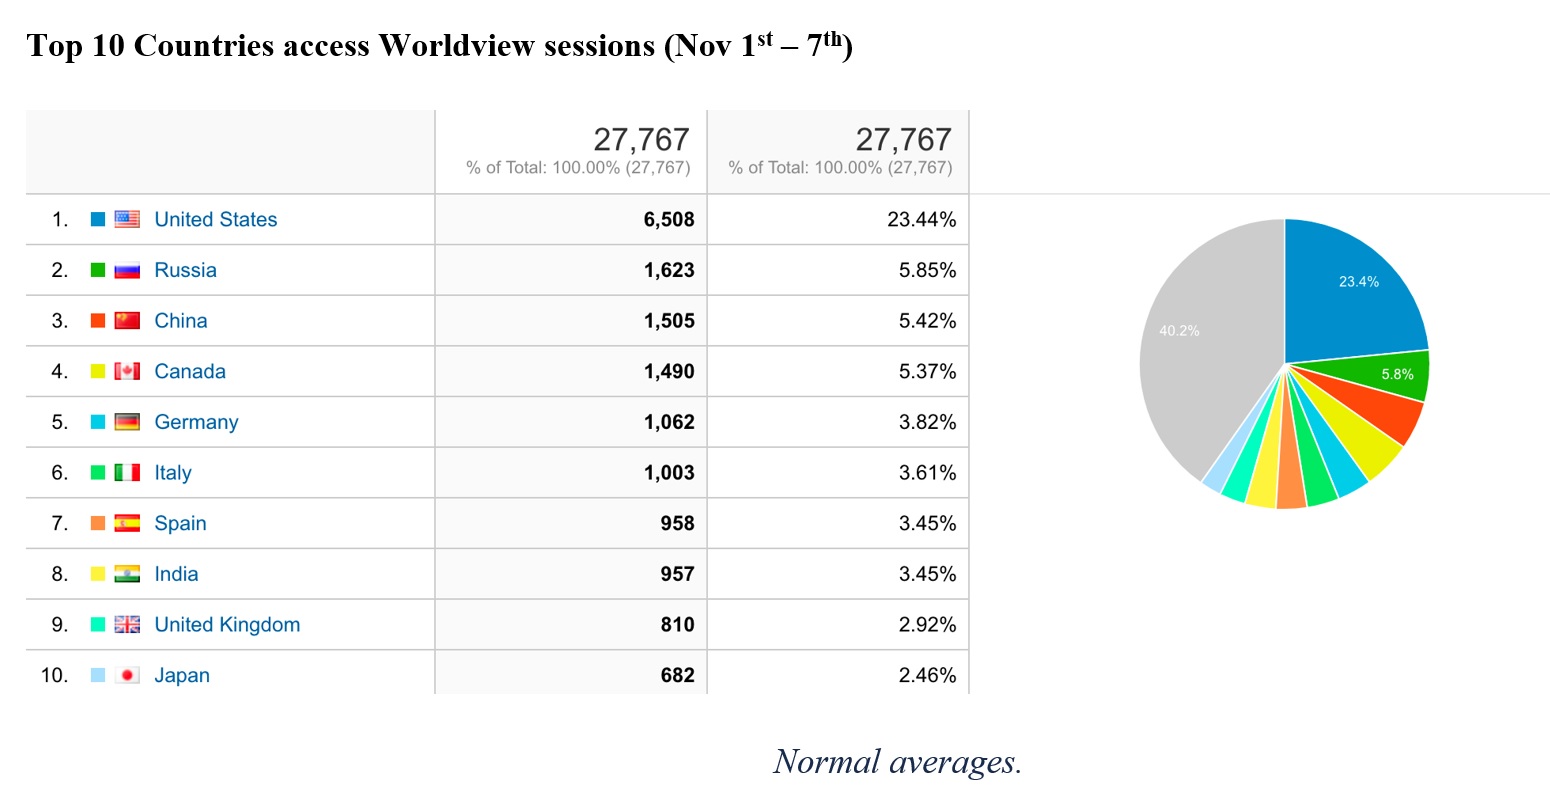 Top 10 Countries accessing Worldview sessions (Nov 1-7)